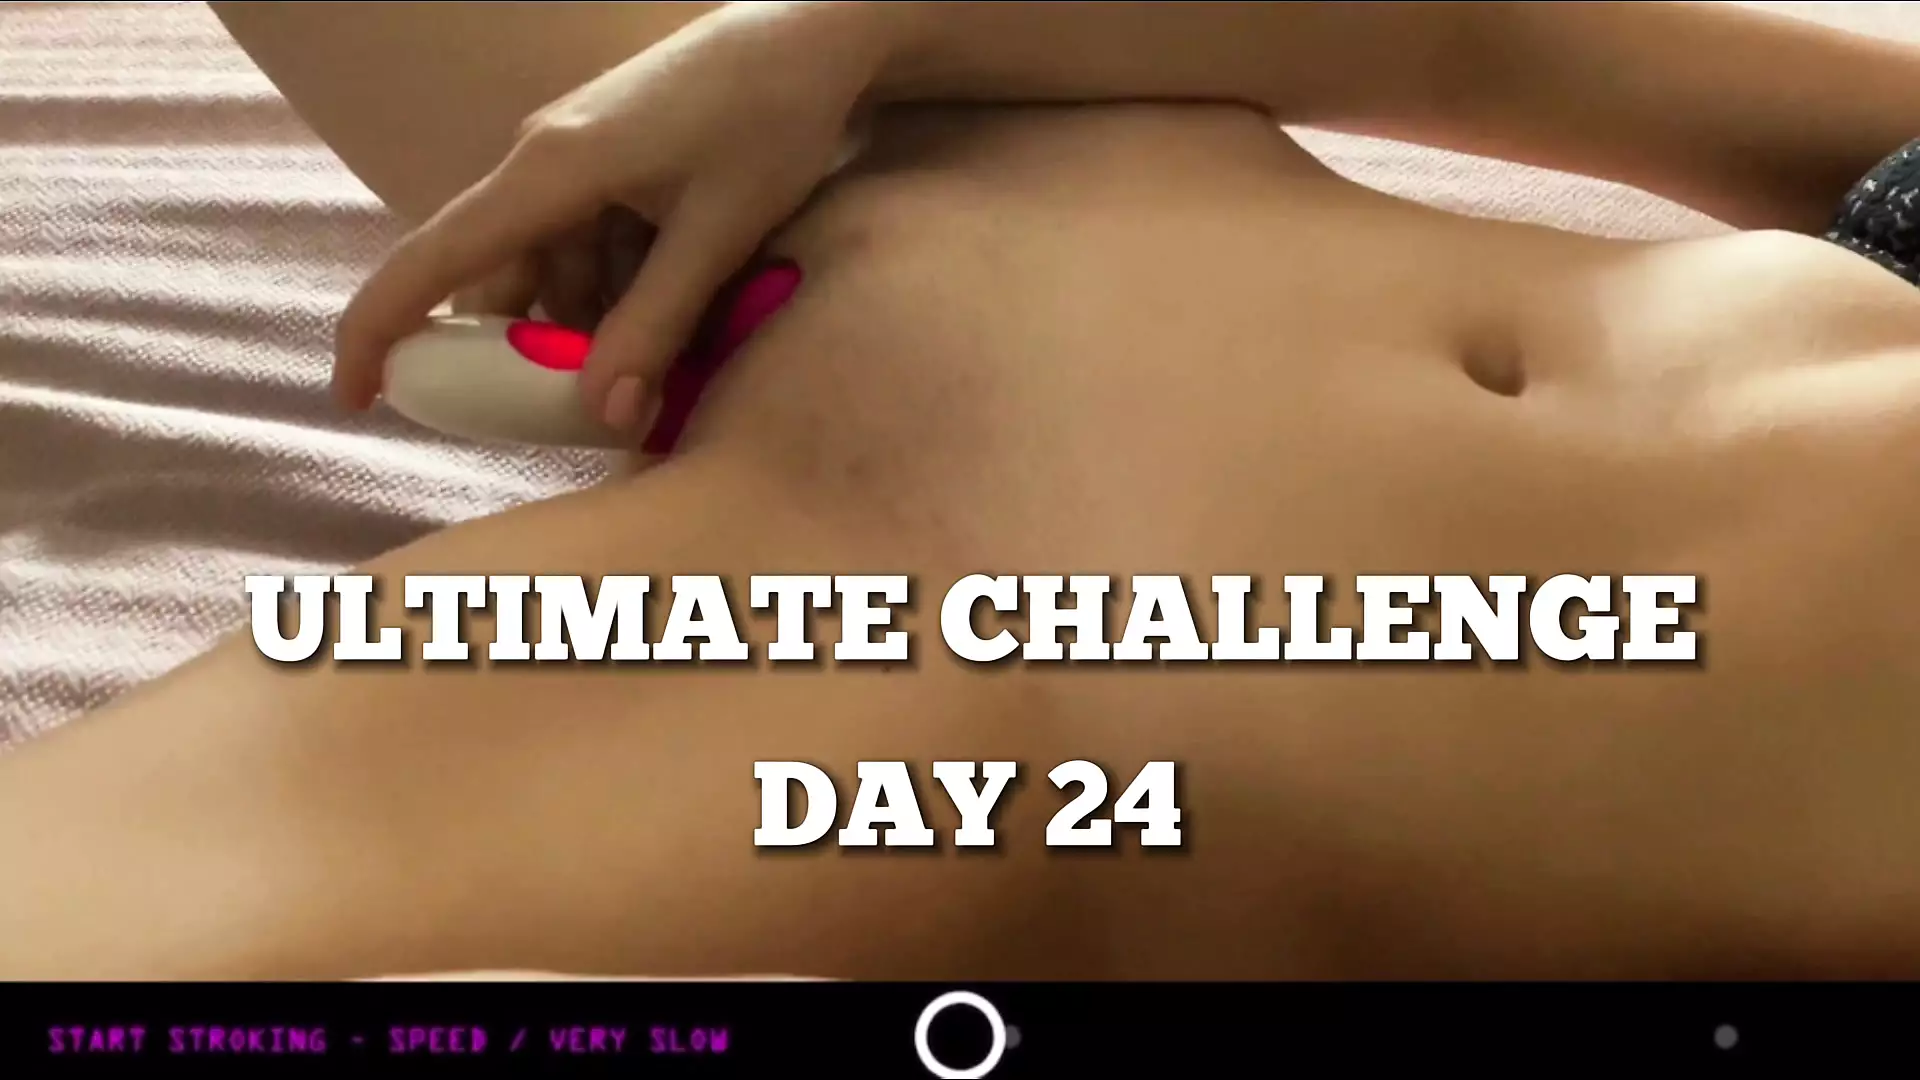 danielle marie benoit recommends edging challenge for women pic